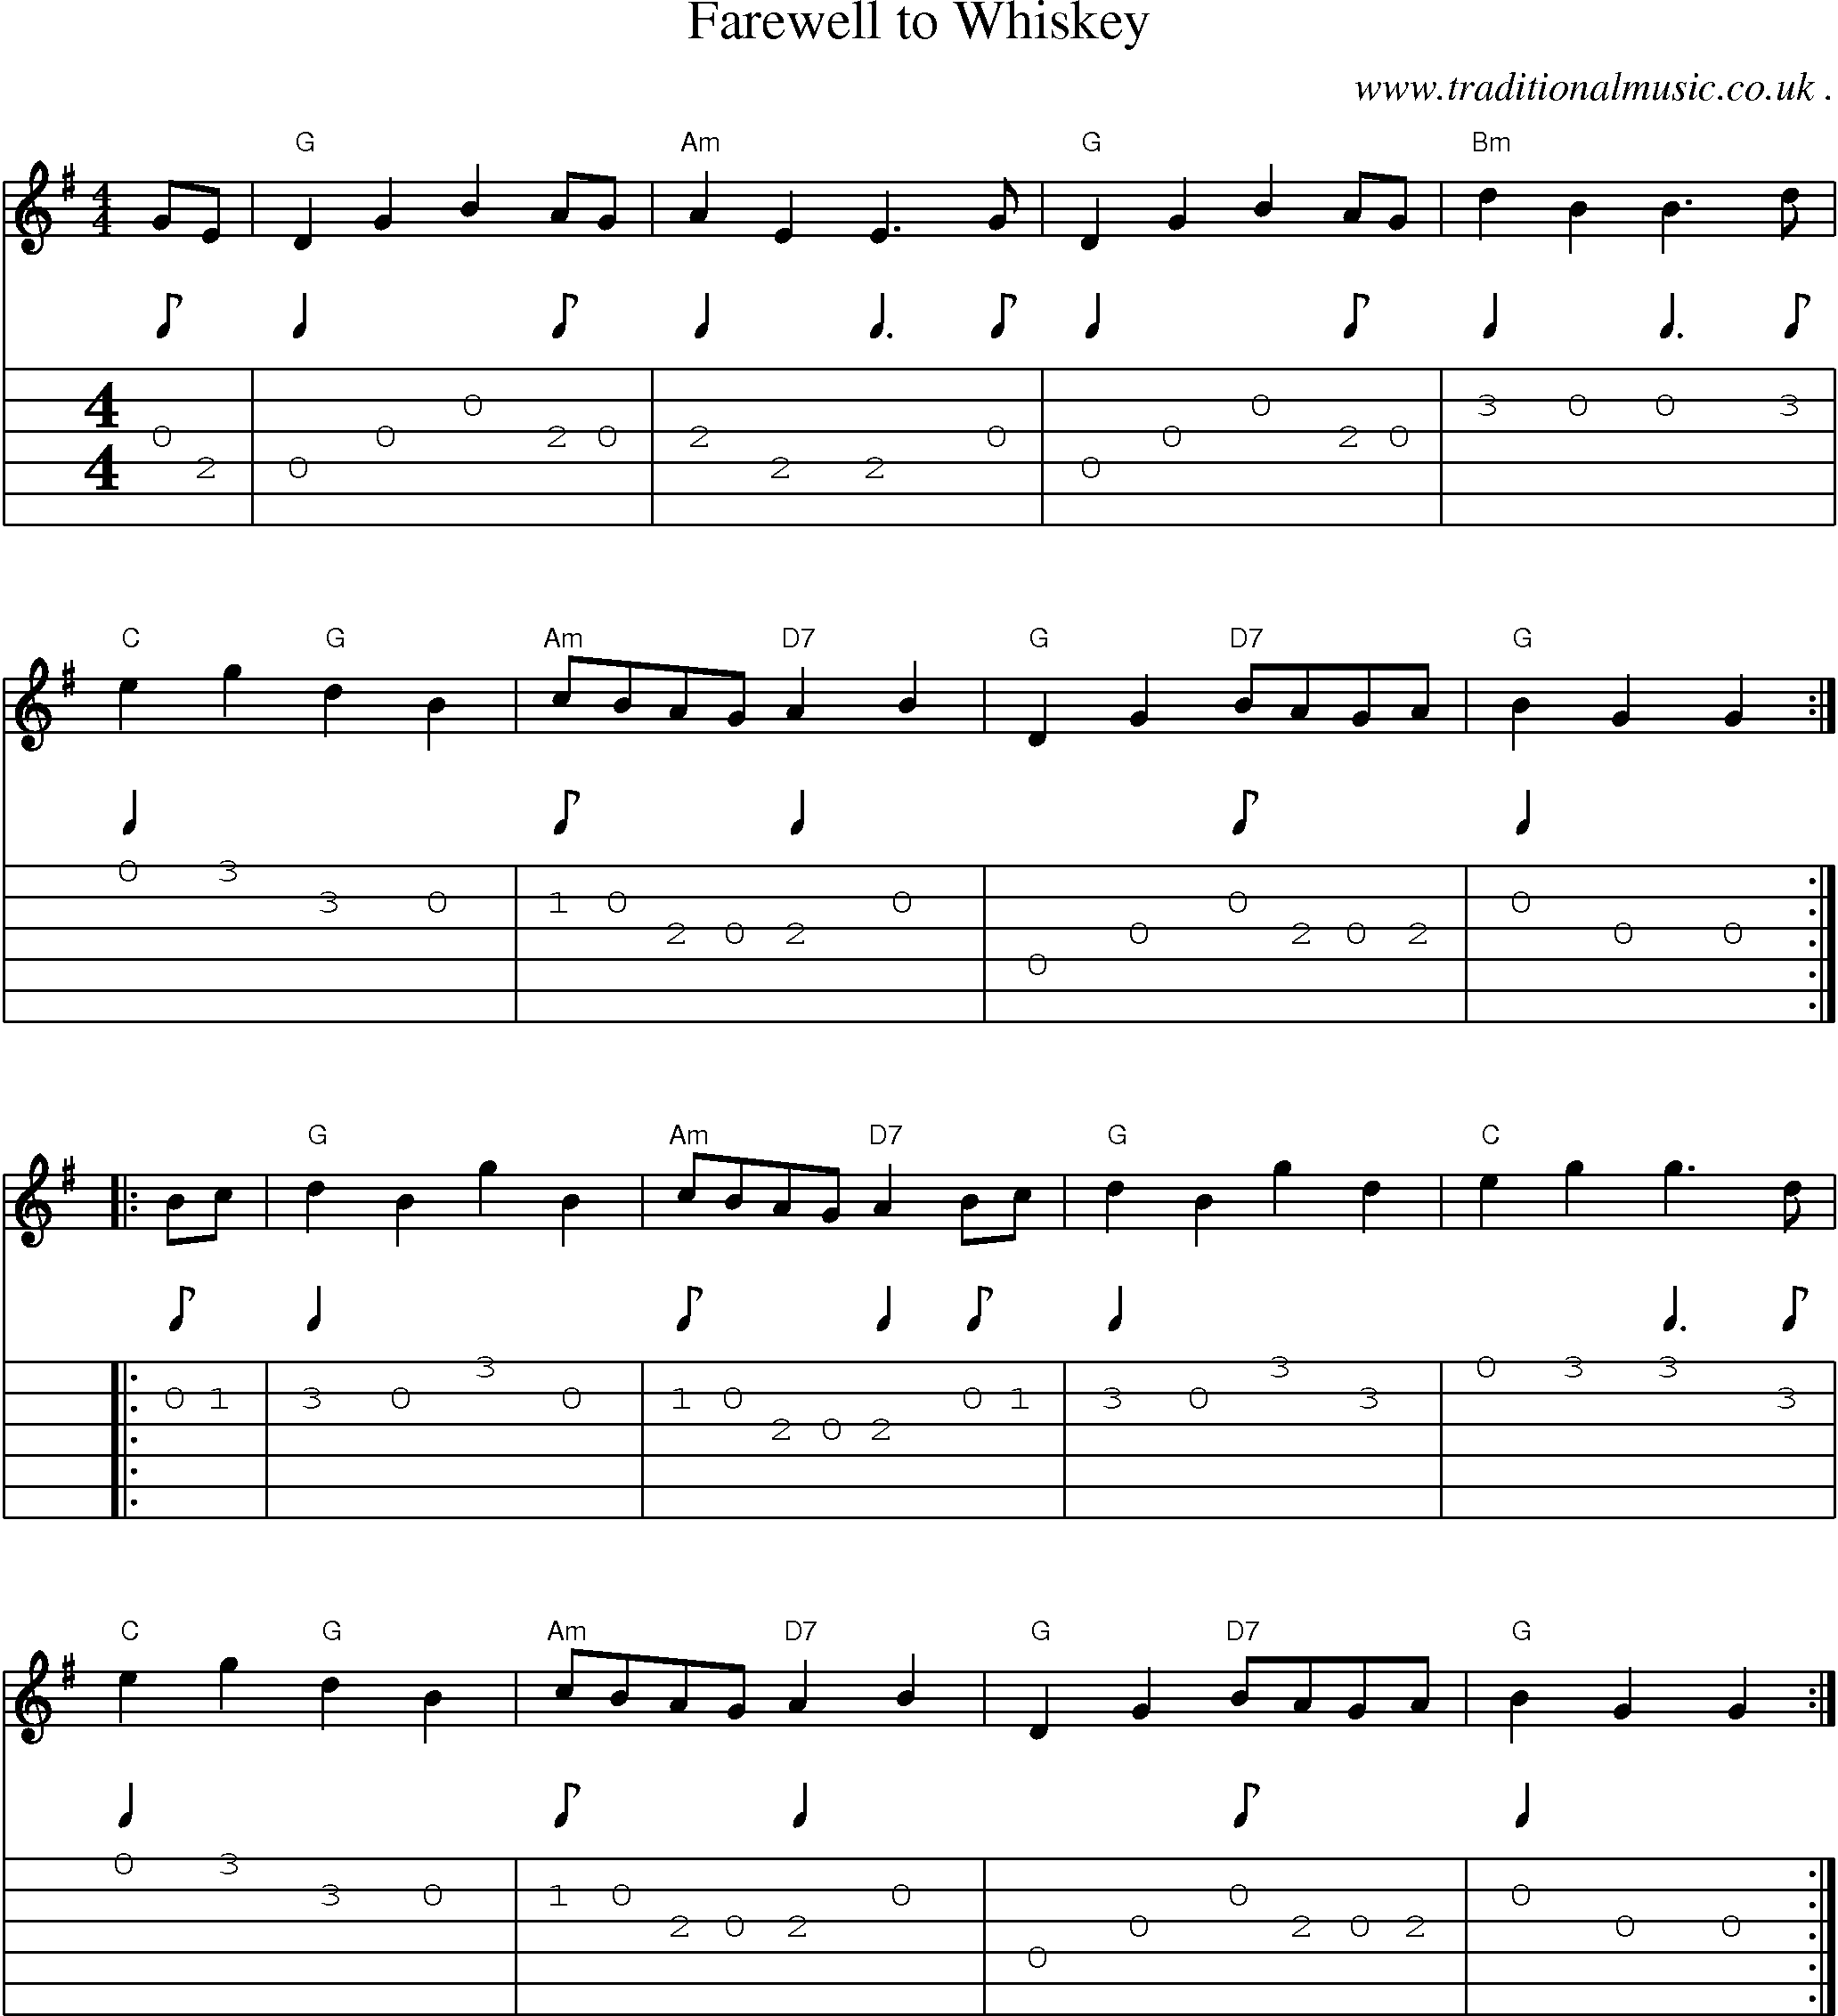 Music Score and Guitar Tabs for Farewell To Whiskey